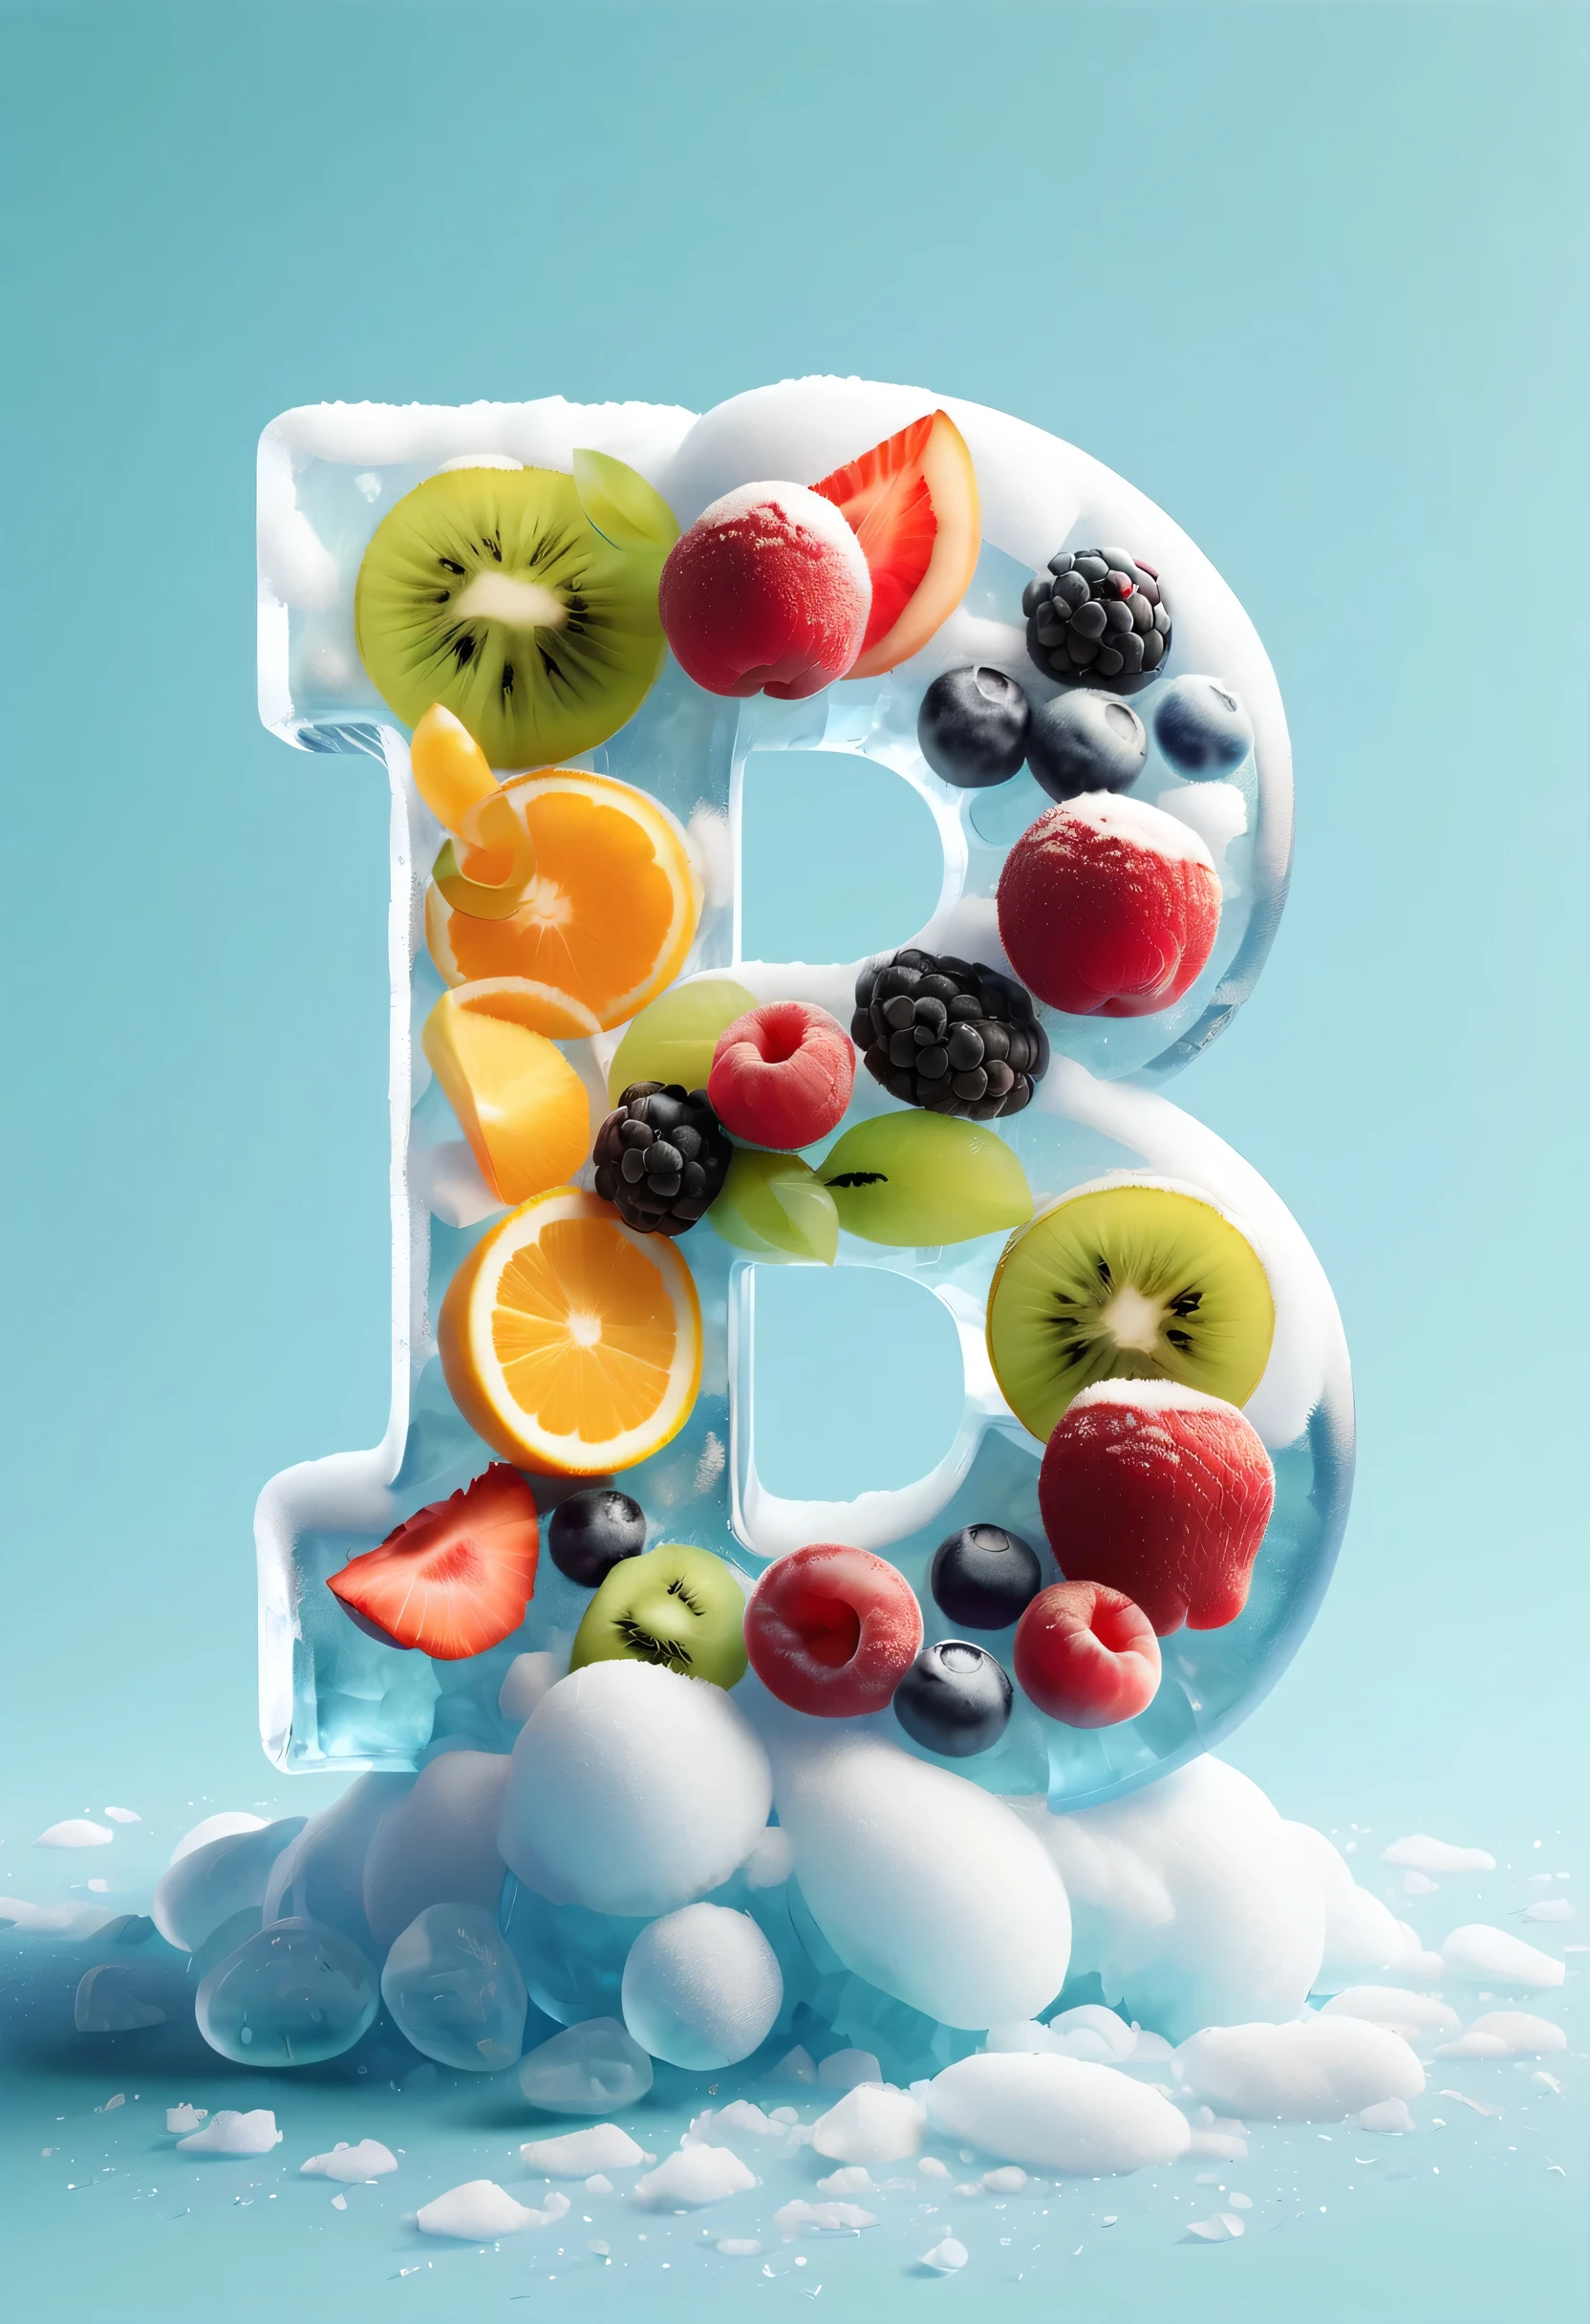 (best quality,4K,8k,high resolution,masterpiece:1.2),Super detailed,(actual,photoactual,photo-actual:1.37),Creative font design,icy texture,crystal ice,snow,cold,snowflakes,crack,summer,Delicious fruits,Detailed ice texture,dark background,sparkling texture,frozen mail,flashing icy patterns,refreshing colour,Fruit slices in the sun,Juicy grapes,Chilled watermelon slices,Cool sensation,Juxtaposition of warm and cool colors,Vibrant red strawberries,water drops on fruit,Letter fragments in ice cubes,snow-covered branches,translucent ice shards,crystal clear font,Cool blue tones,Cold format engraving.3D